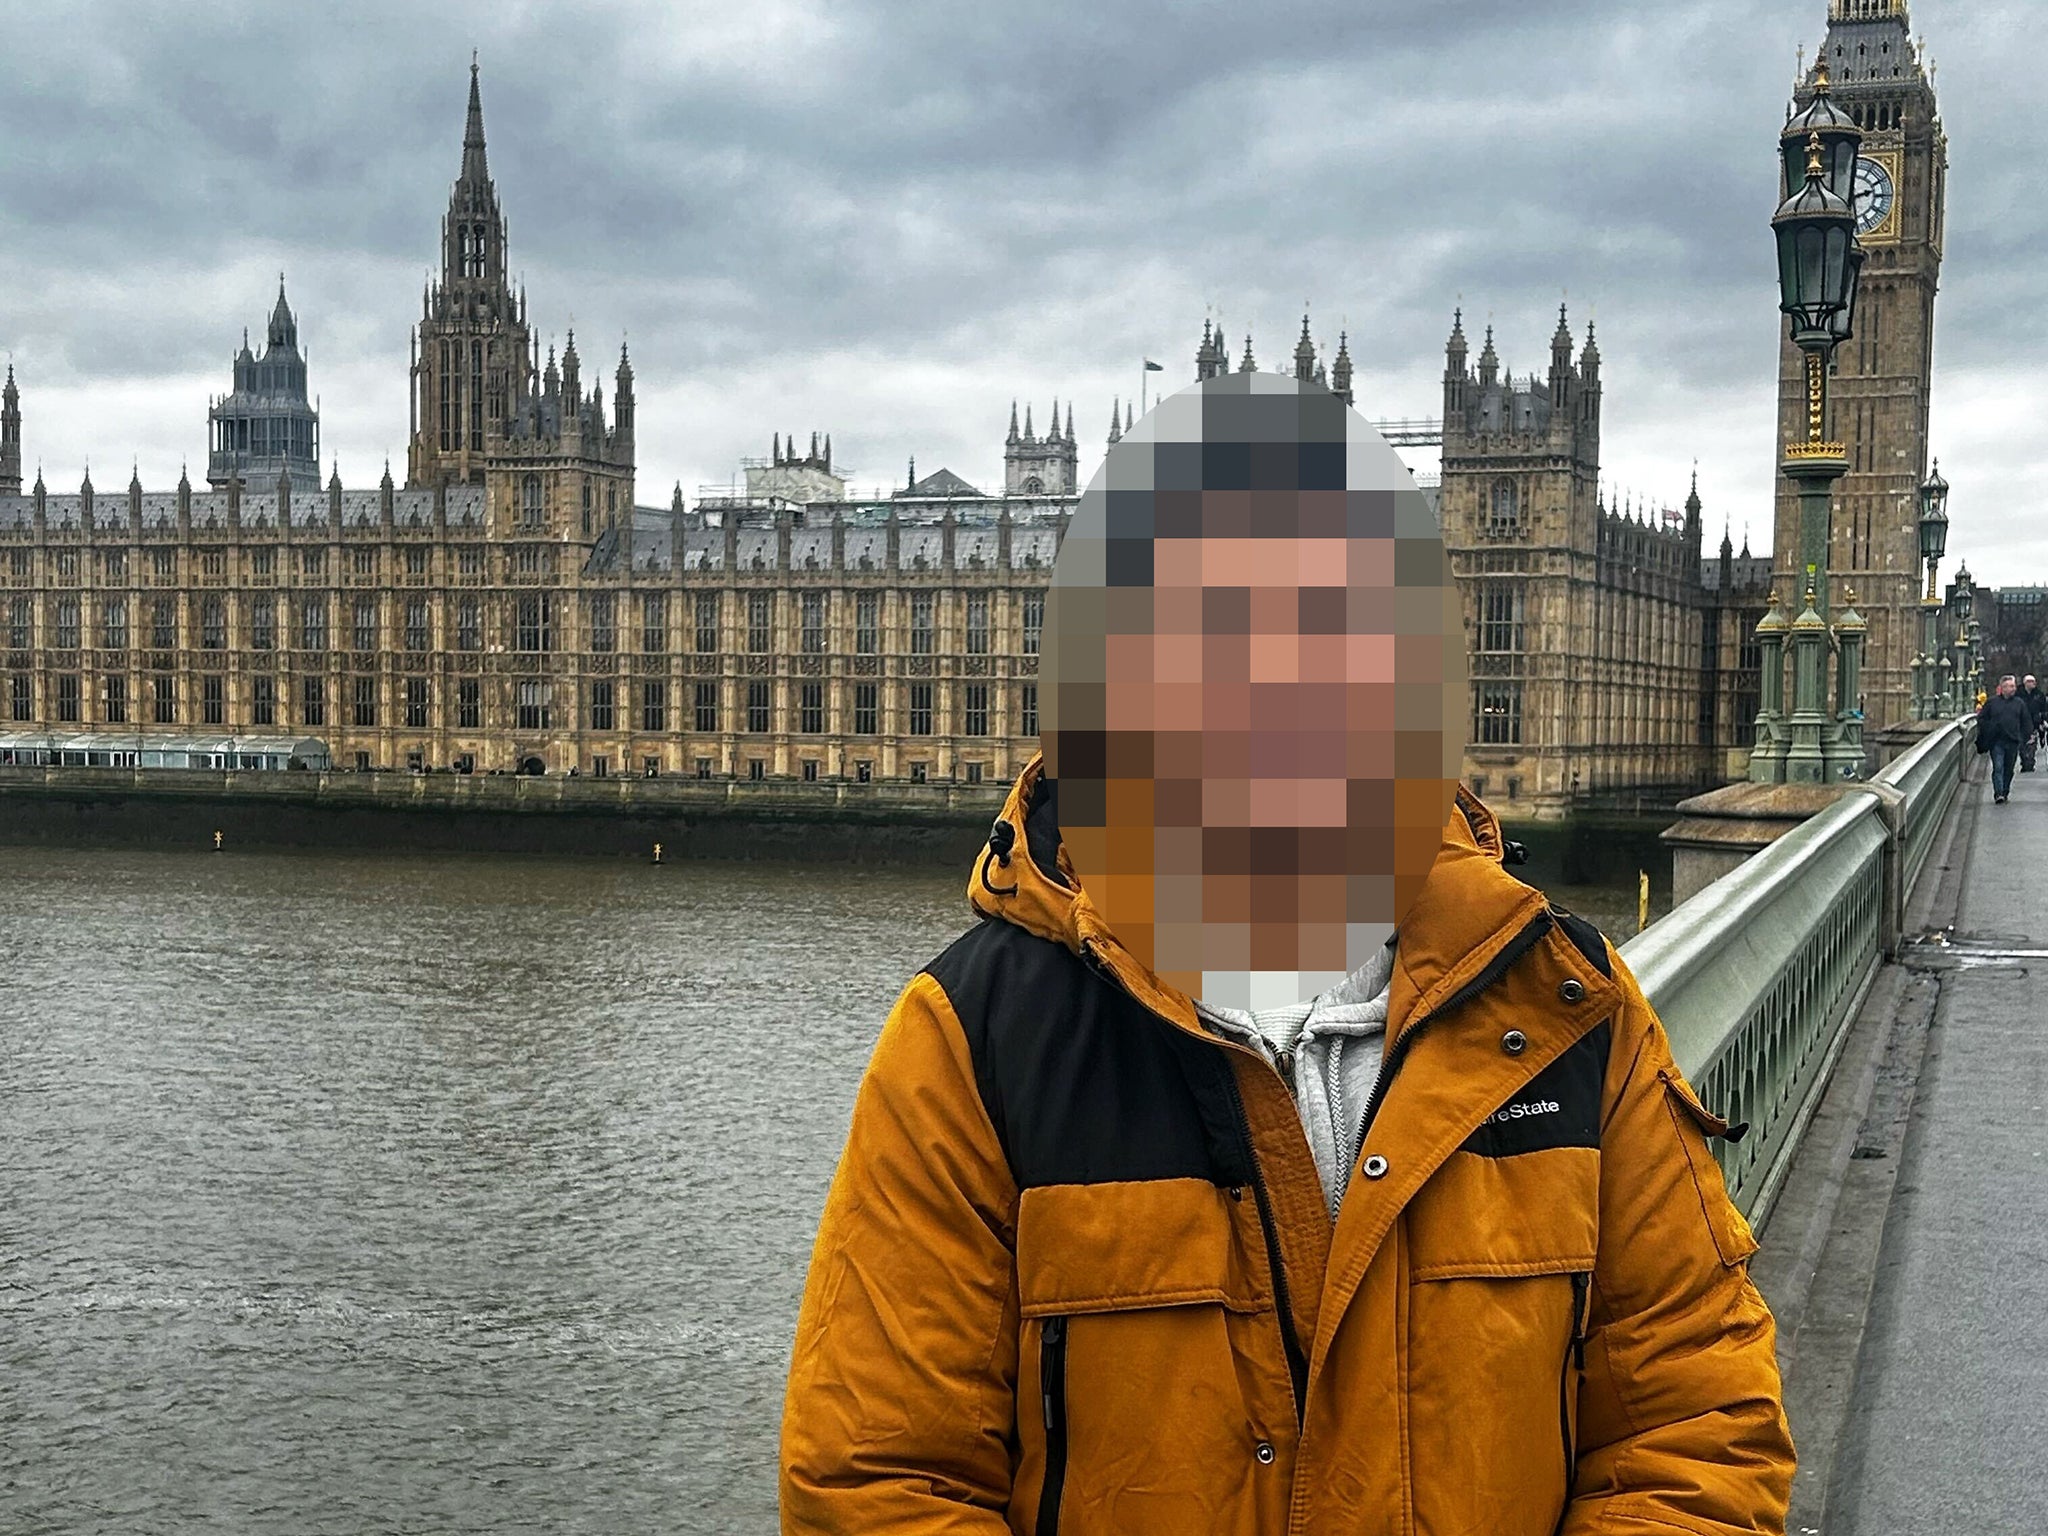 The Afghan war hero, whose face has been pixelated to protect his identity, in Westminster last month